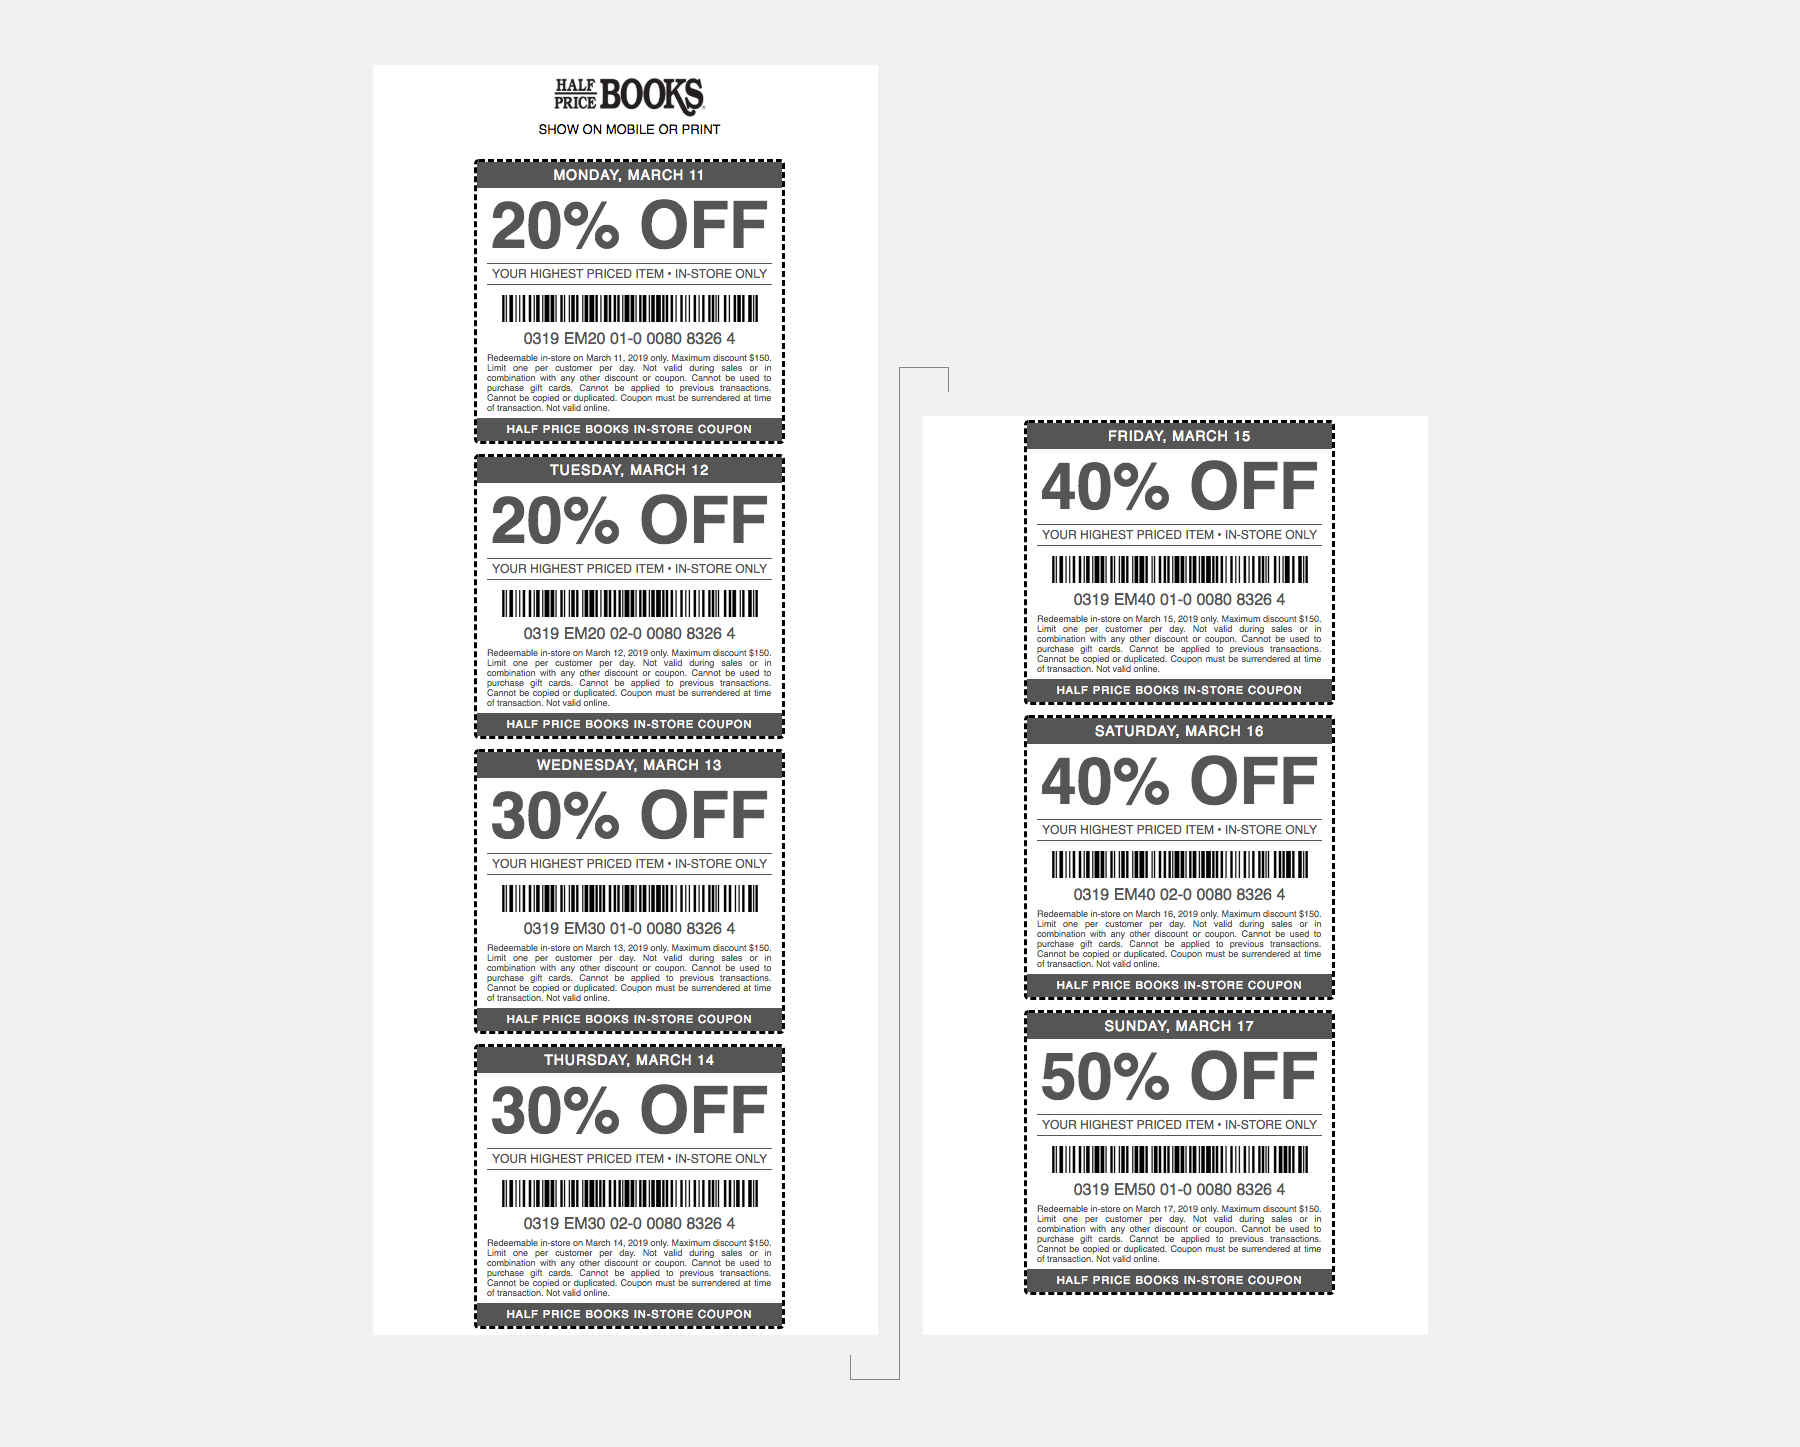 http://tianguyen.io/wp-content/uploads/2019/03/hpb-email-coupons.png